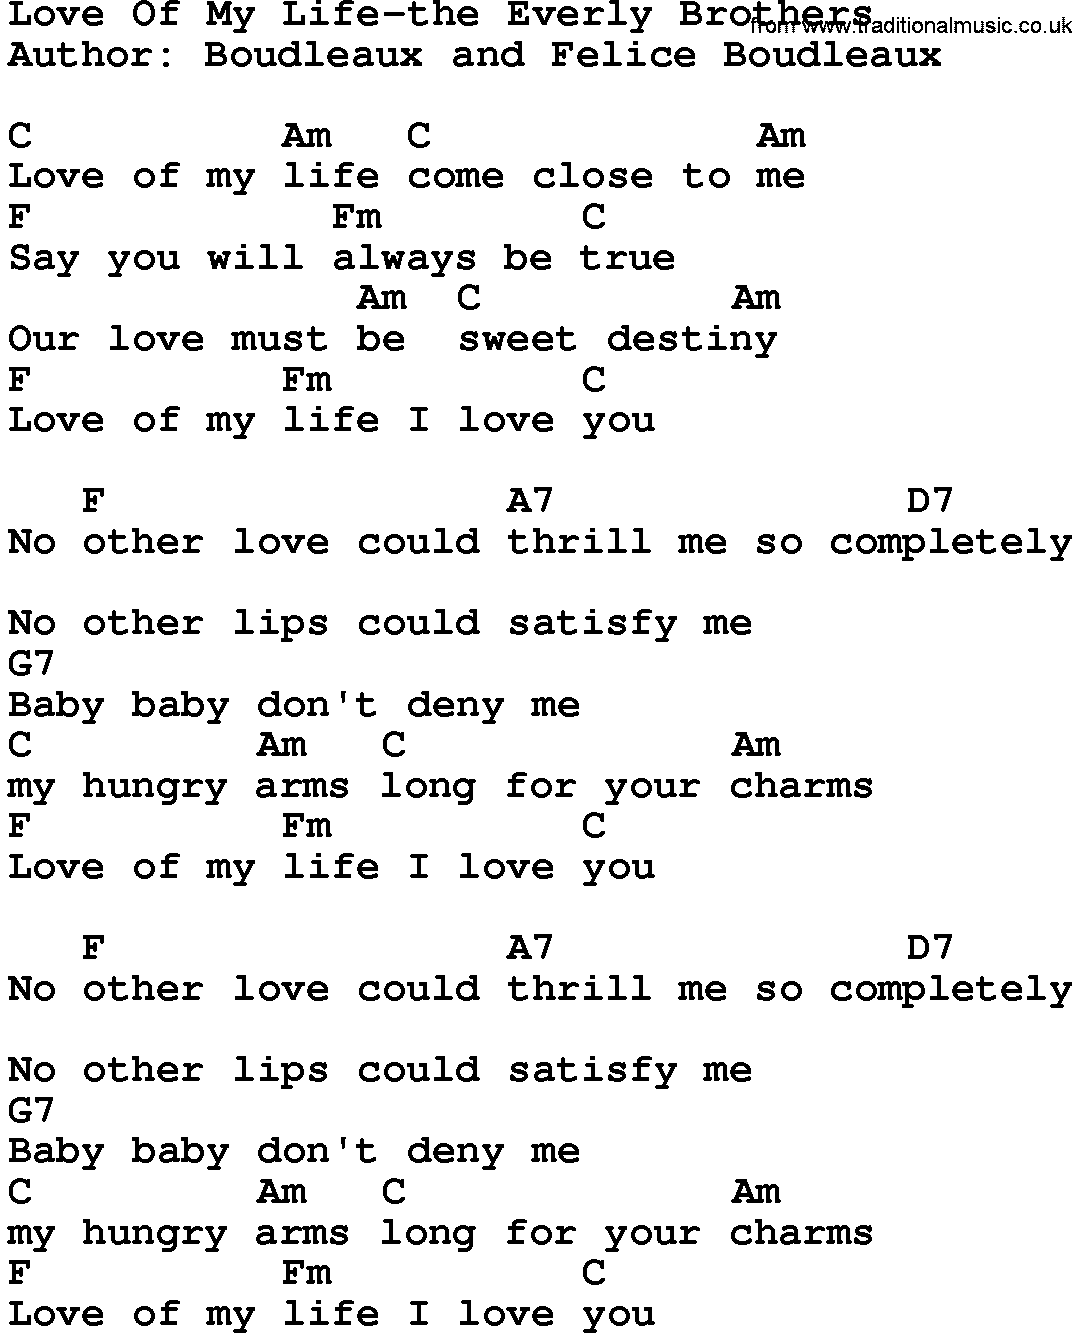 Country music song: Love Of My Life-The Everly Brothers lyrics and chords